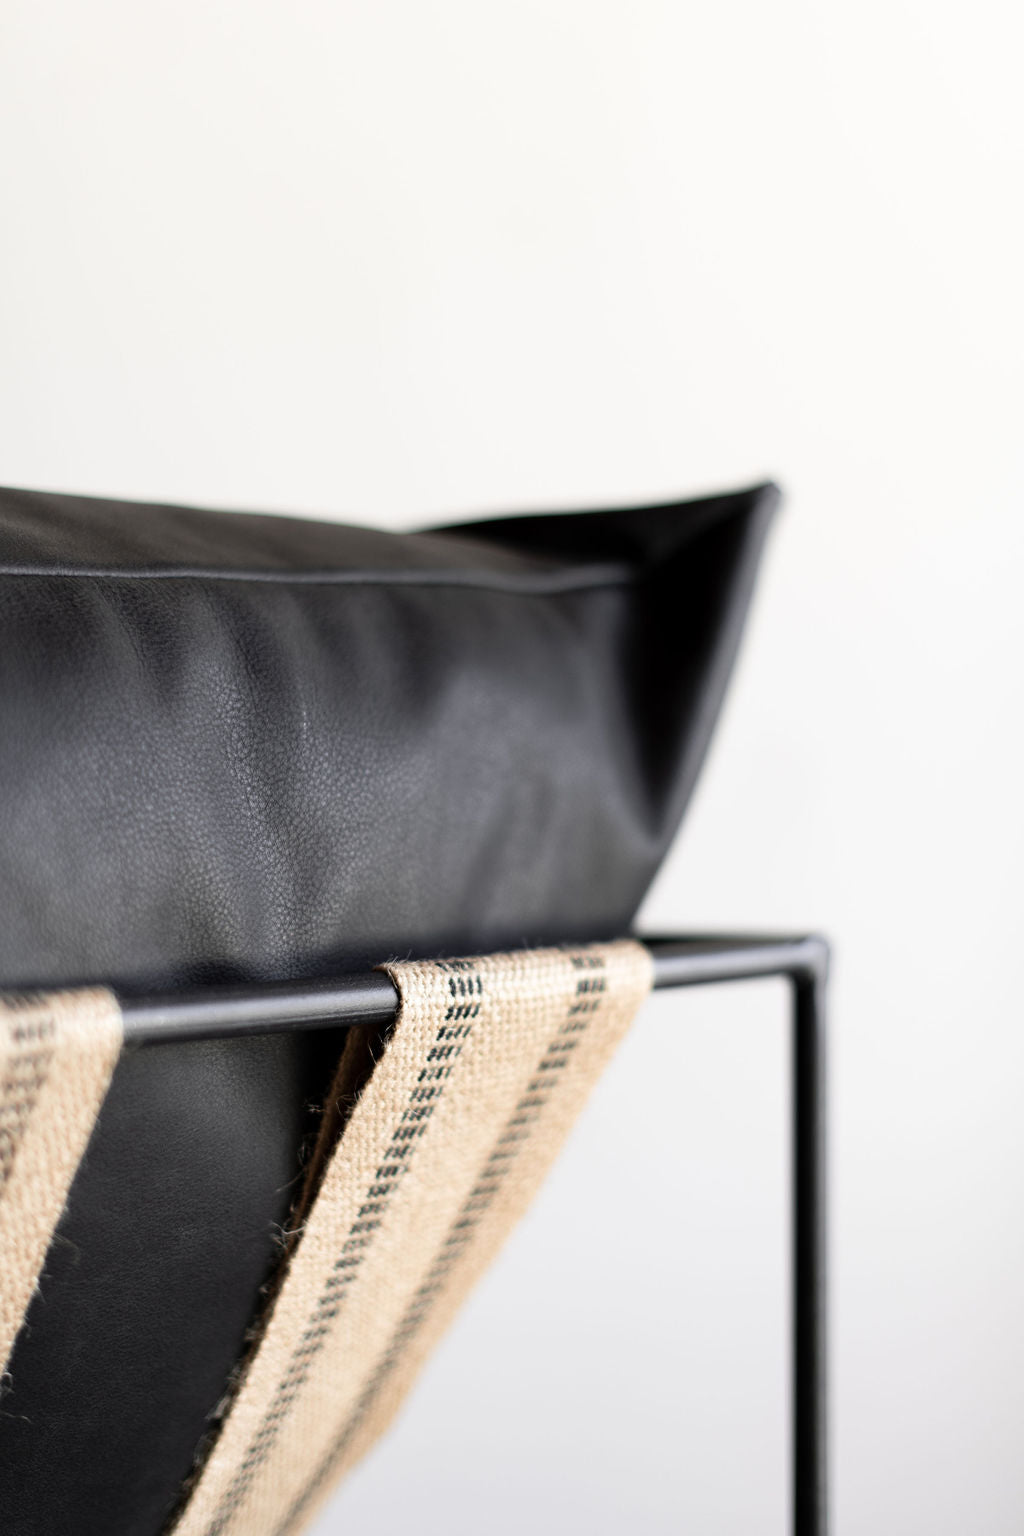 Black leather sierra chair -close up on steel frame 